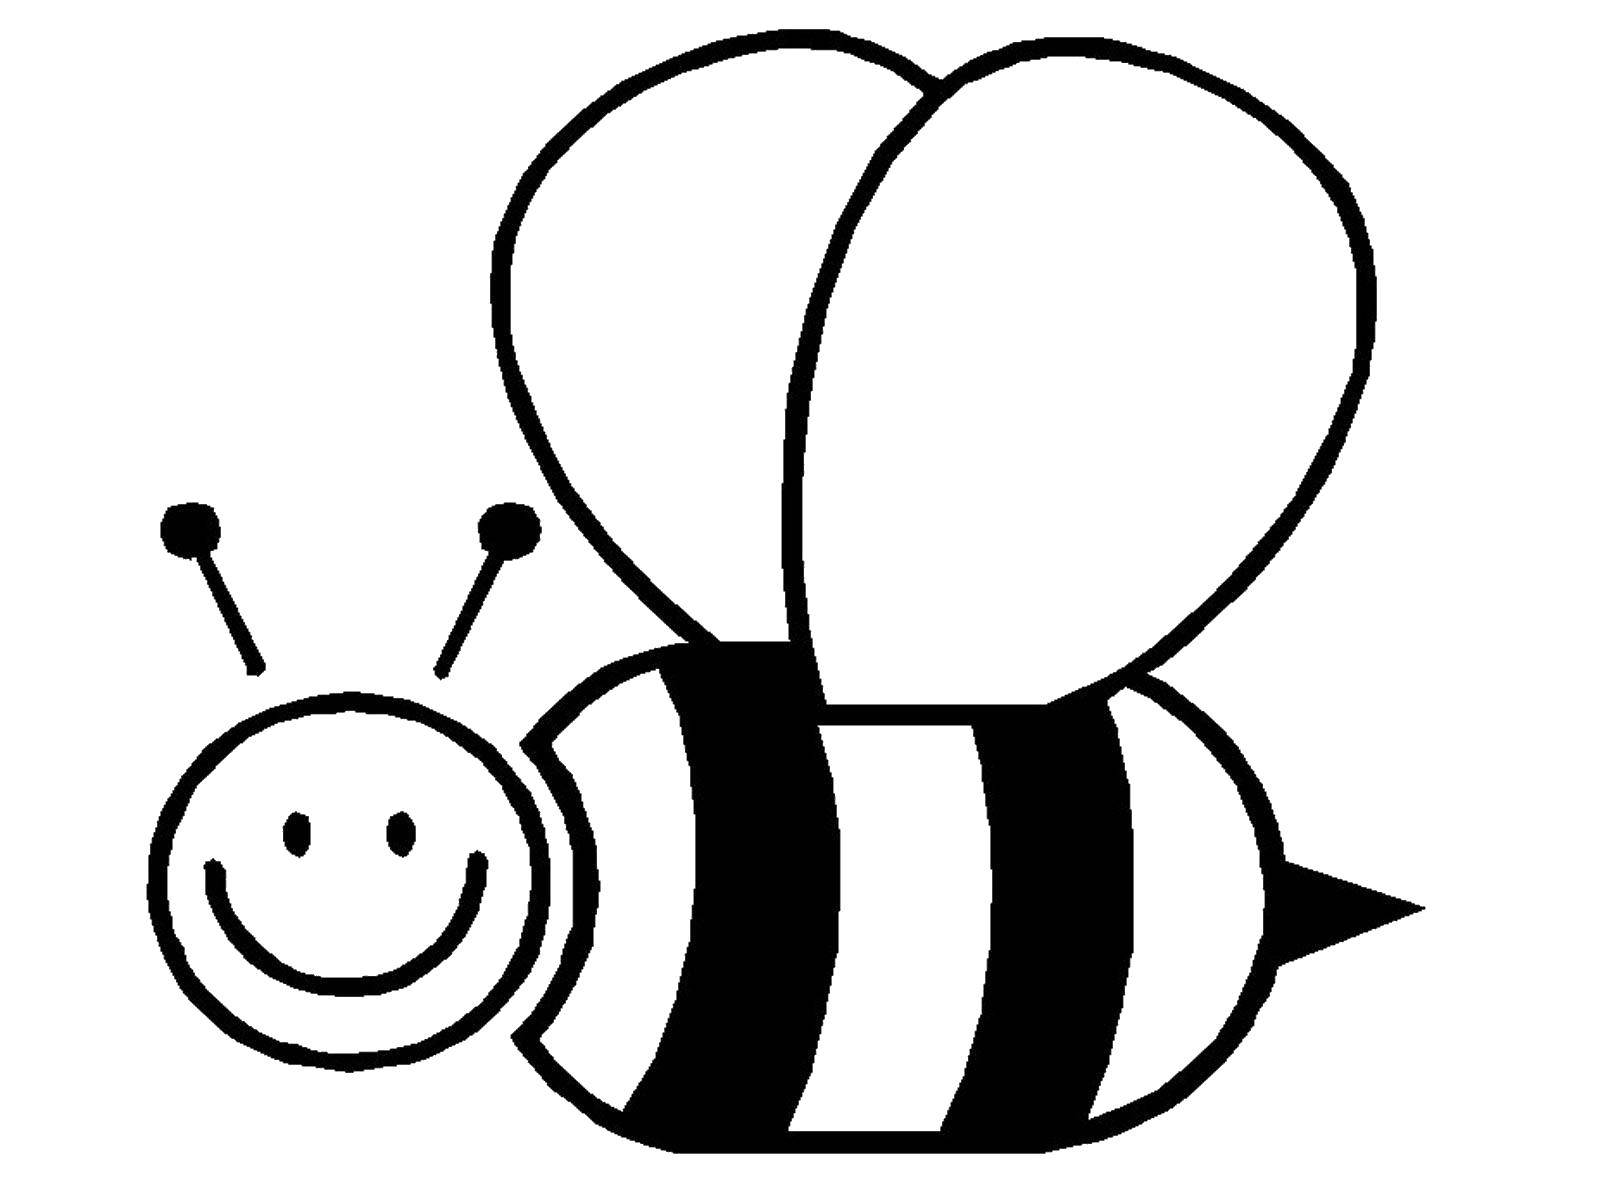 Coloring Cheerful bee. Category Coloring pages for kids. Tags:  Bee, honey.